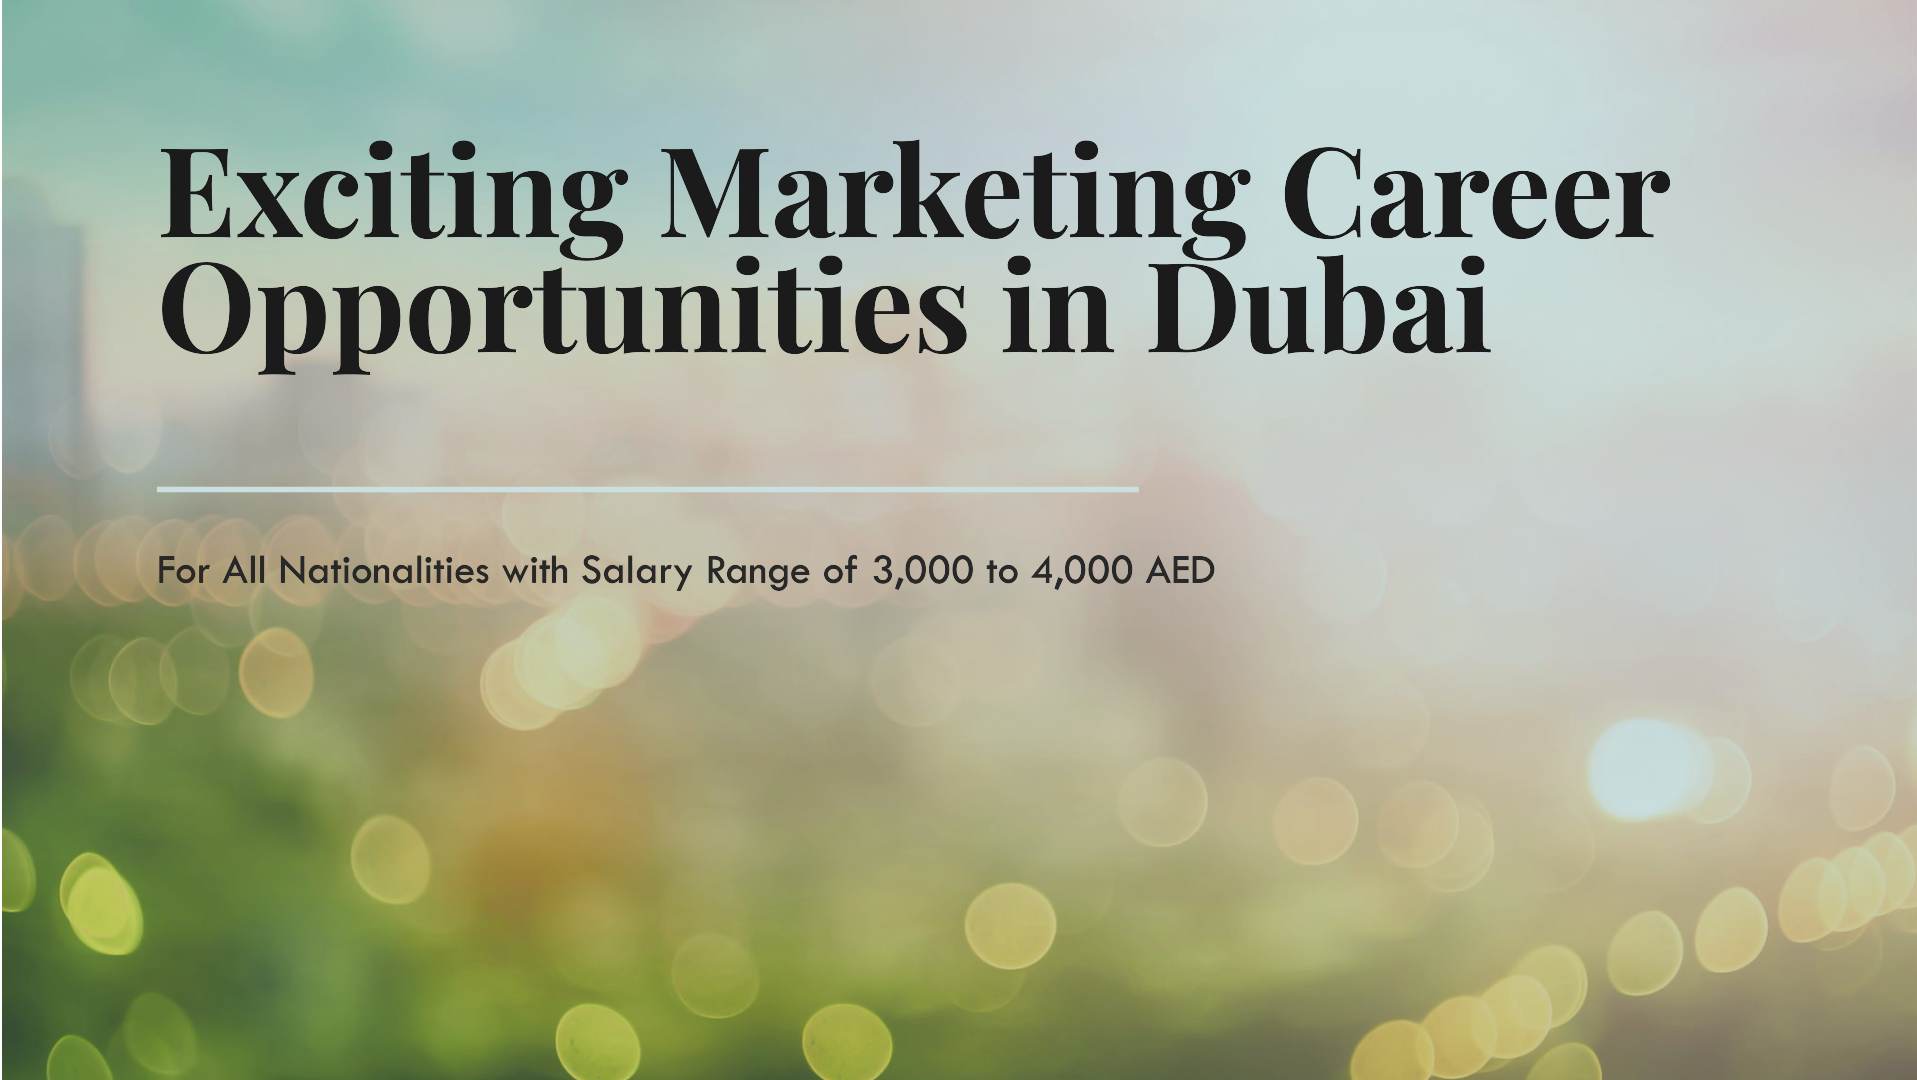 marketing careers dubai for all nationalities with salary 3,000 to 4,000 AED